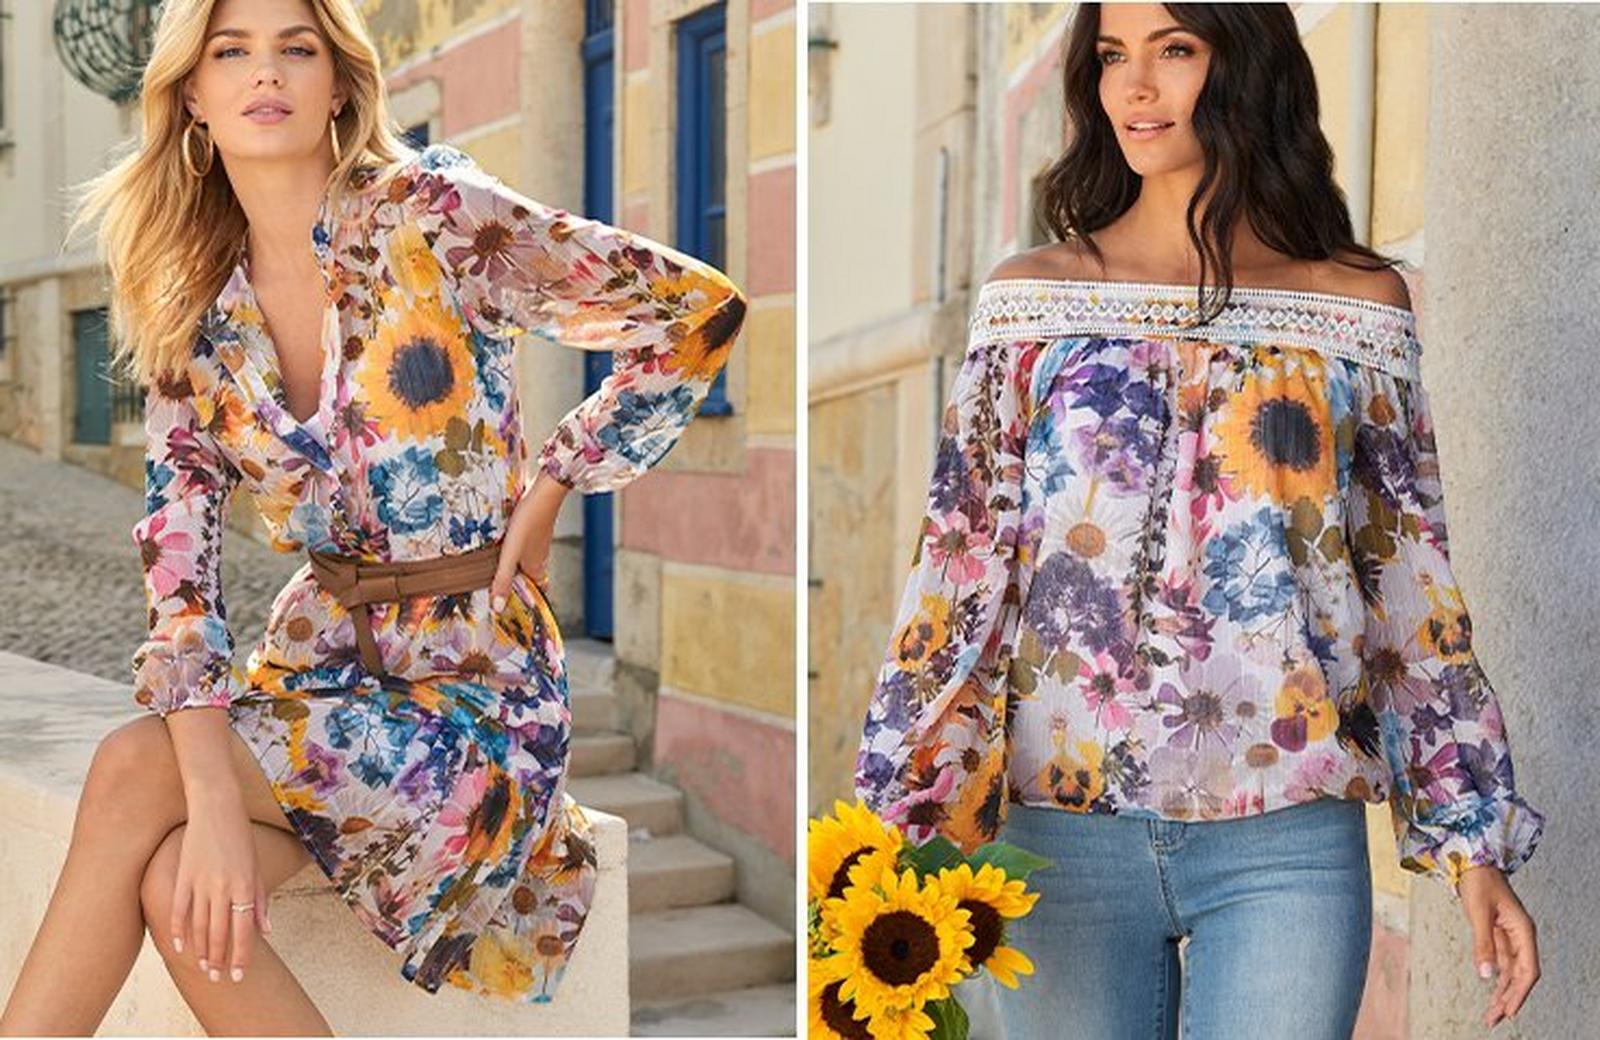 left model wearing a multicolored floral print long-sleeve short dress with a brown belt. right model wearing a lace and rhinestone embellished off-the-shoulder floral printed long sleeve top and jeans.